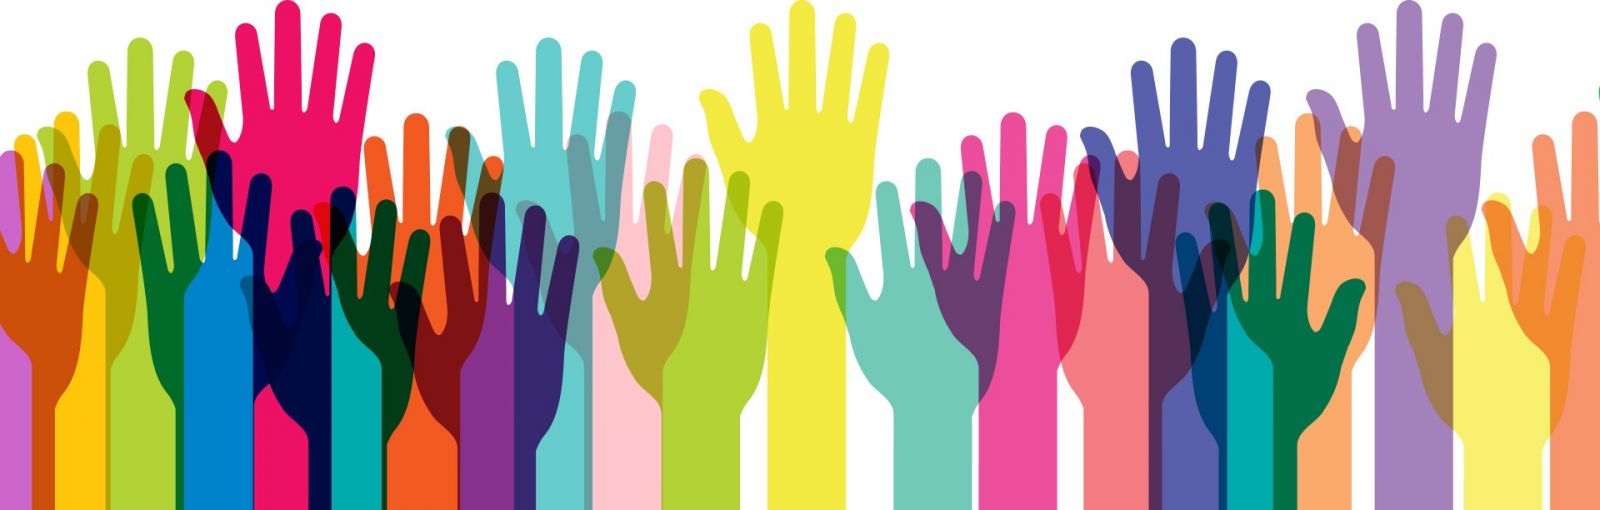 Graphic art image of different colored hands reaching to the sky.